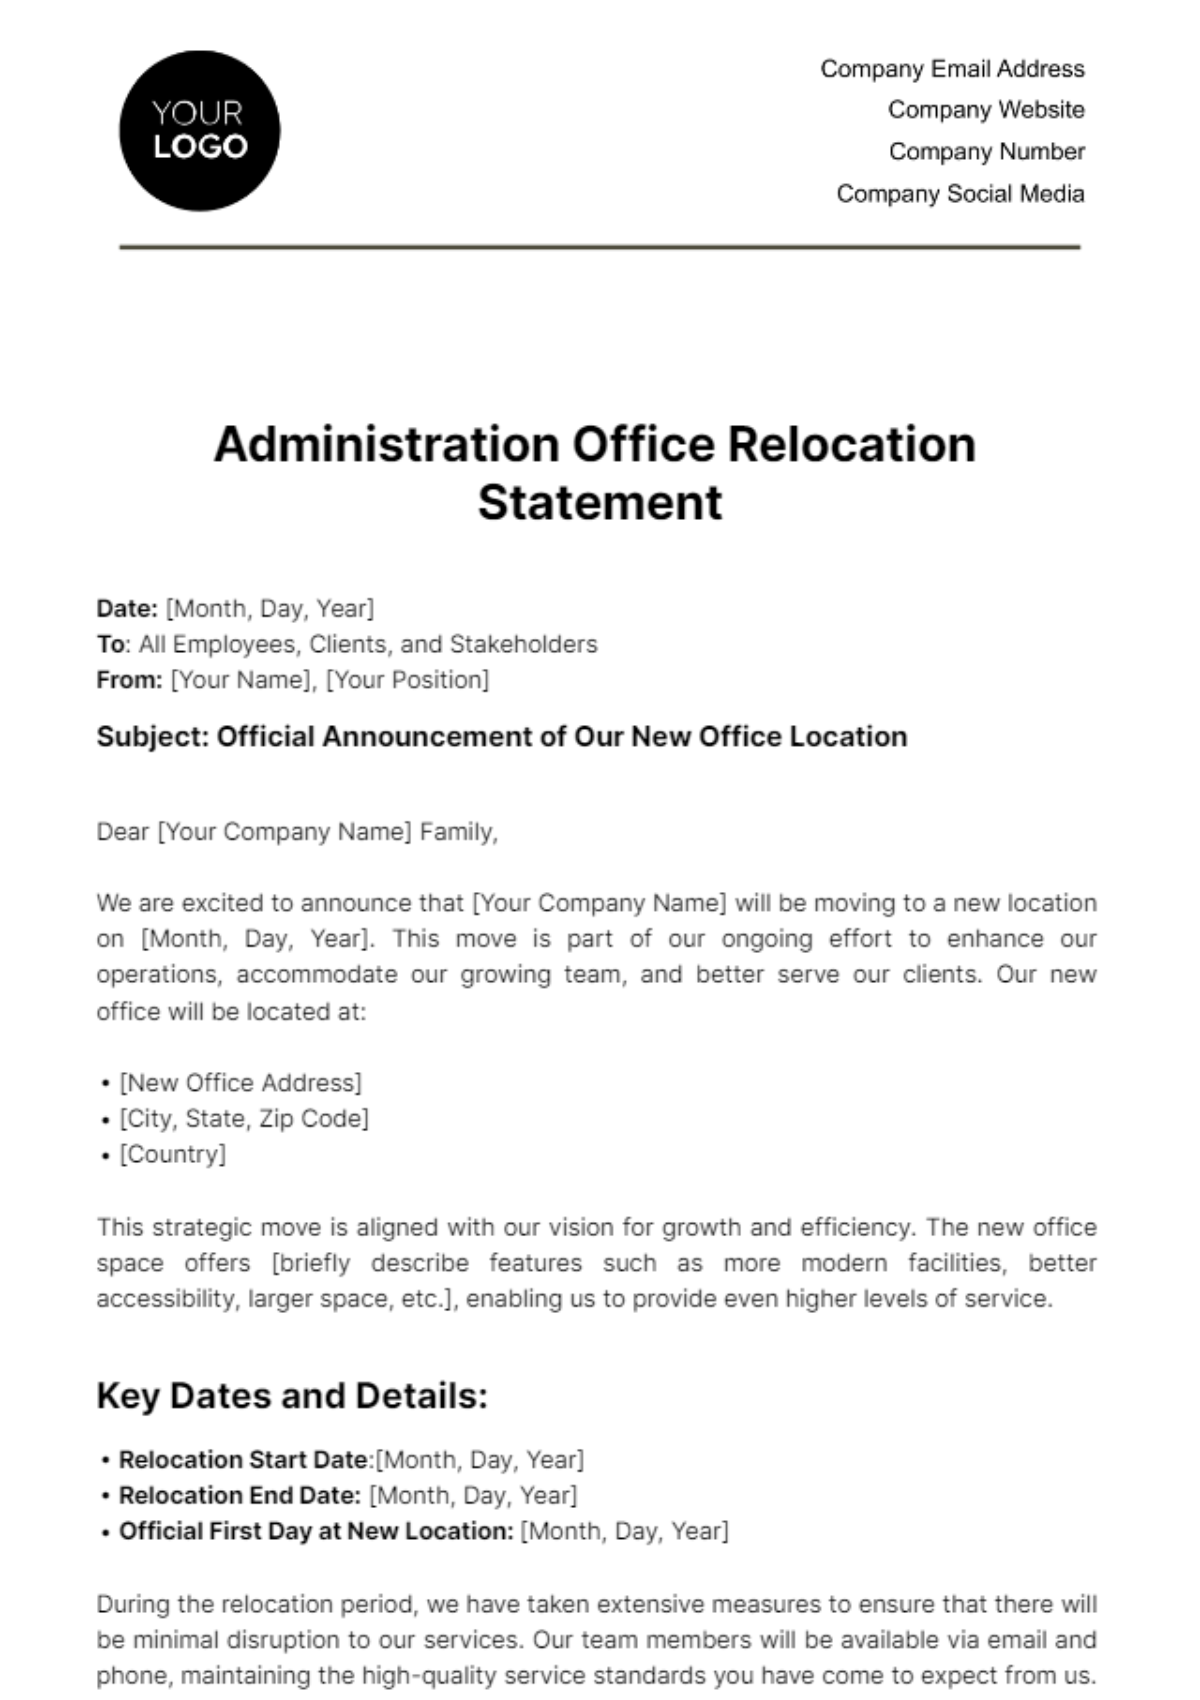 Free Administration Office Relocation Statement Template